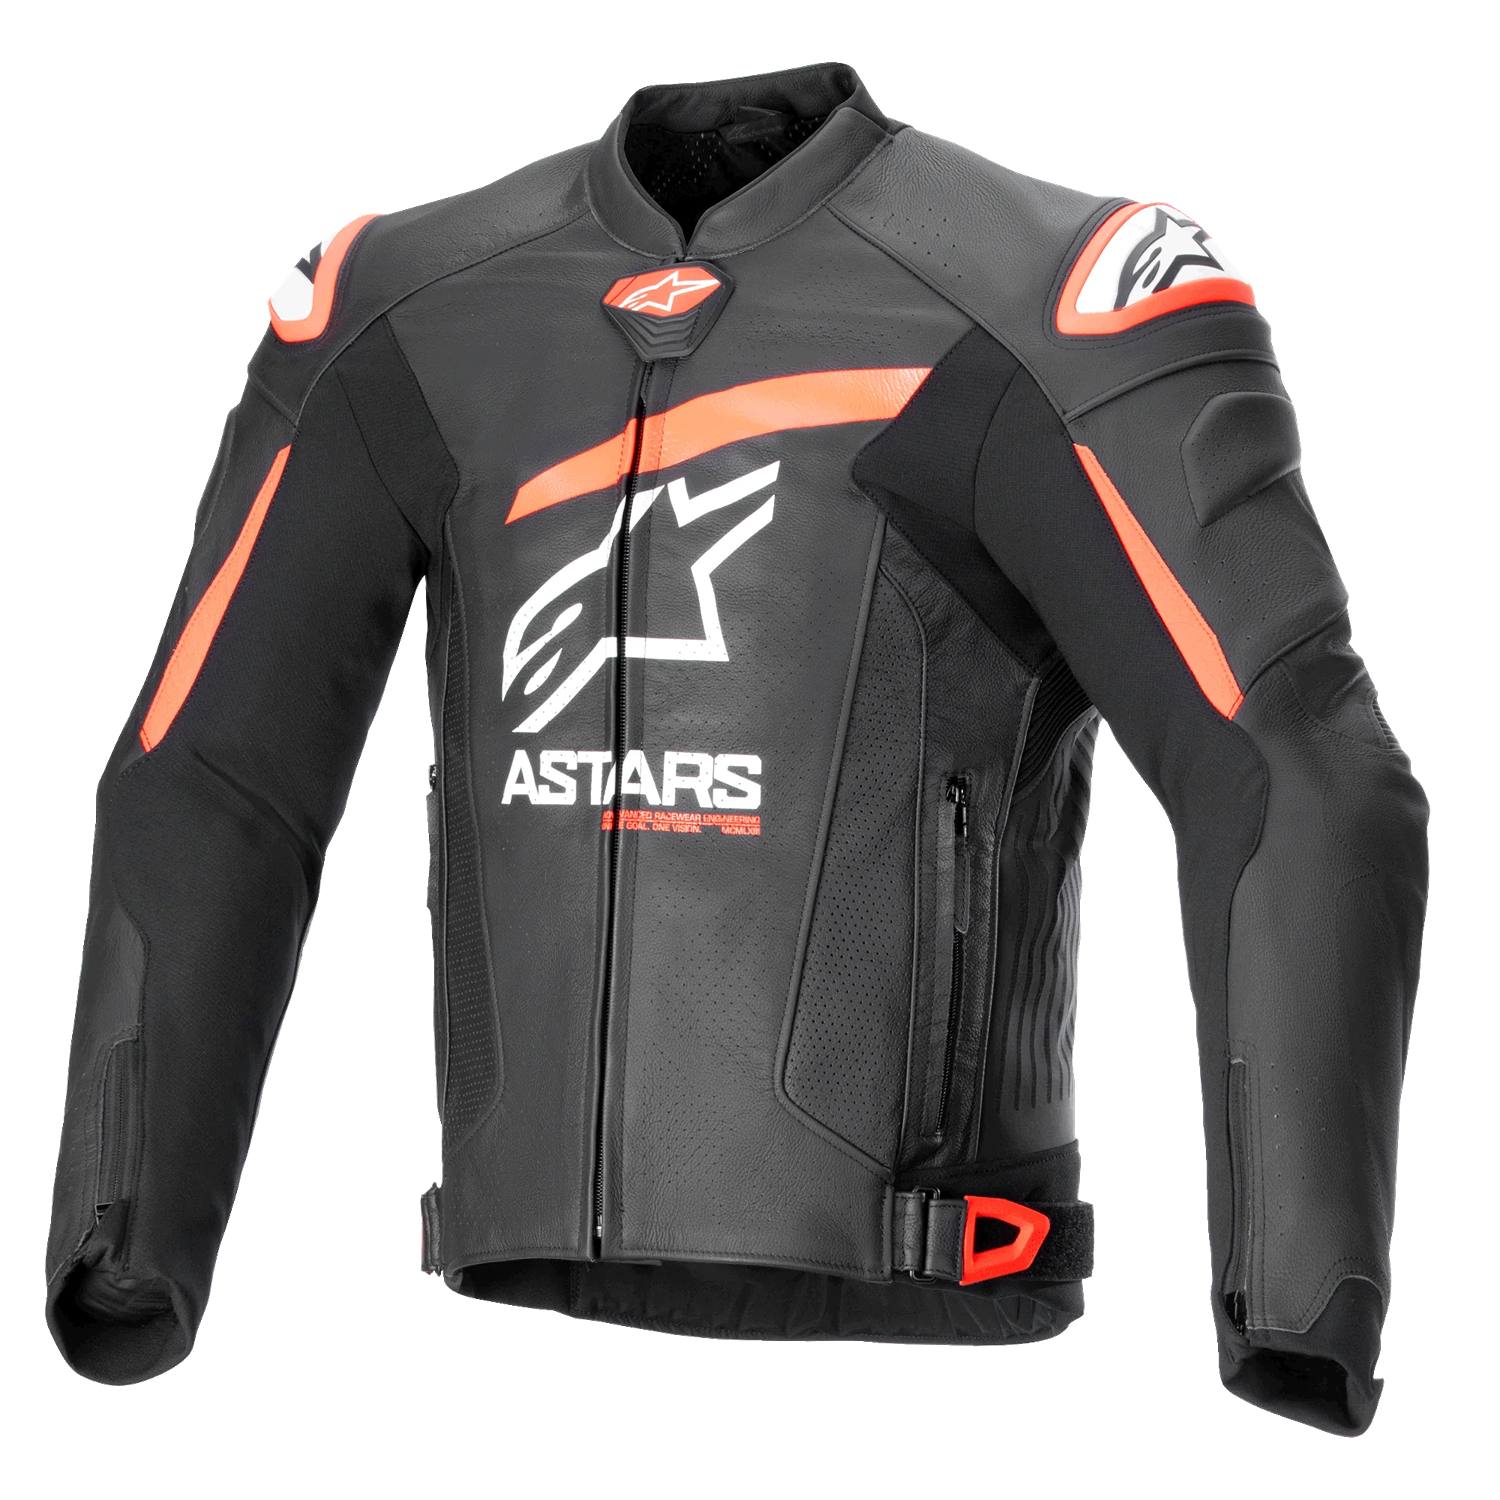 Image of Alpinestars Gp Plus R V4 Airflow Leather Jacket Black Red Fluo White Size 48 ID 8059347341743